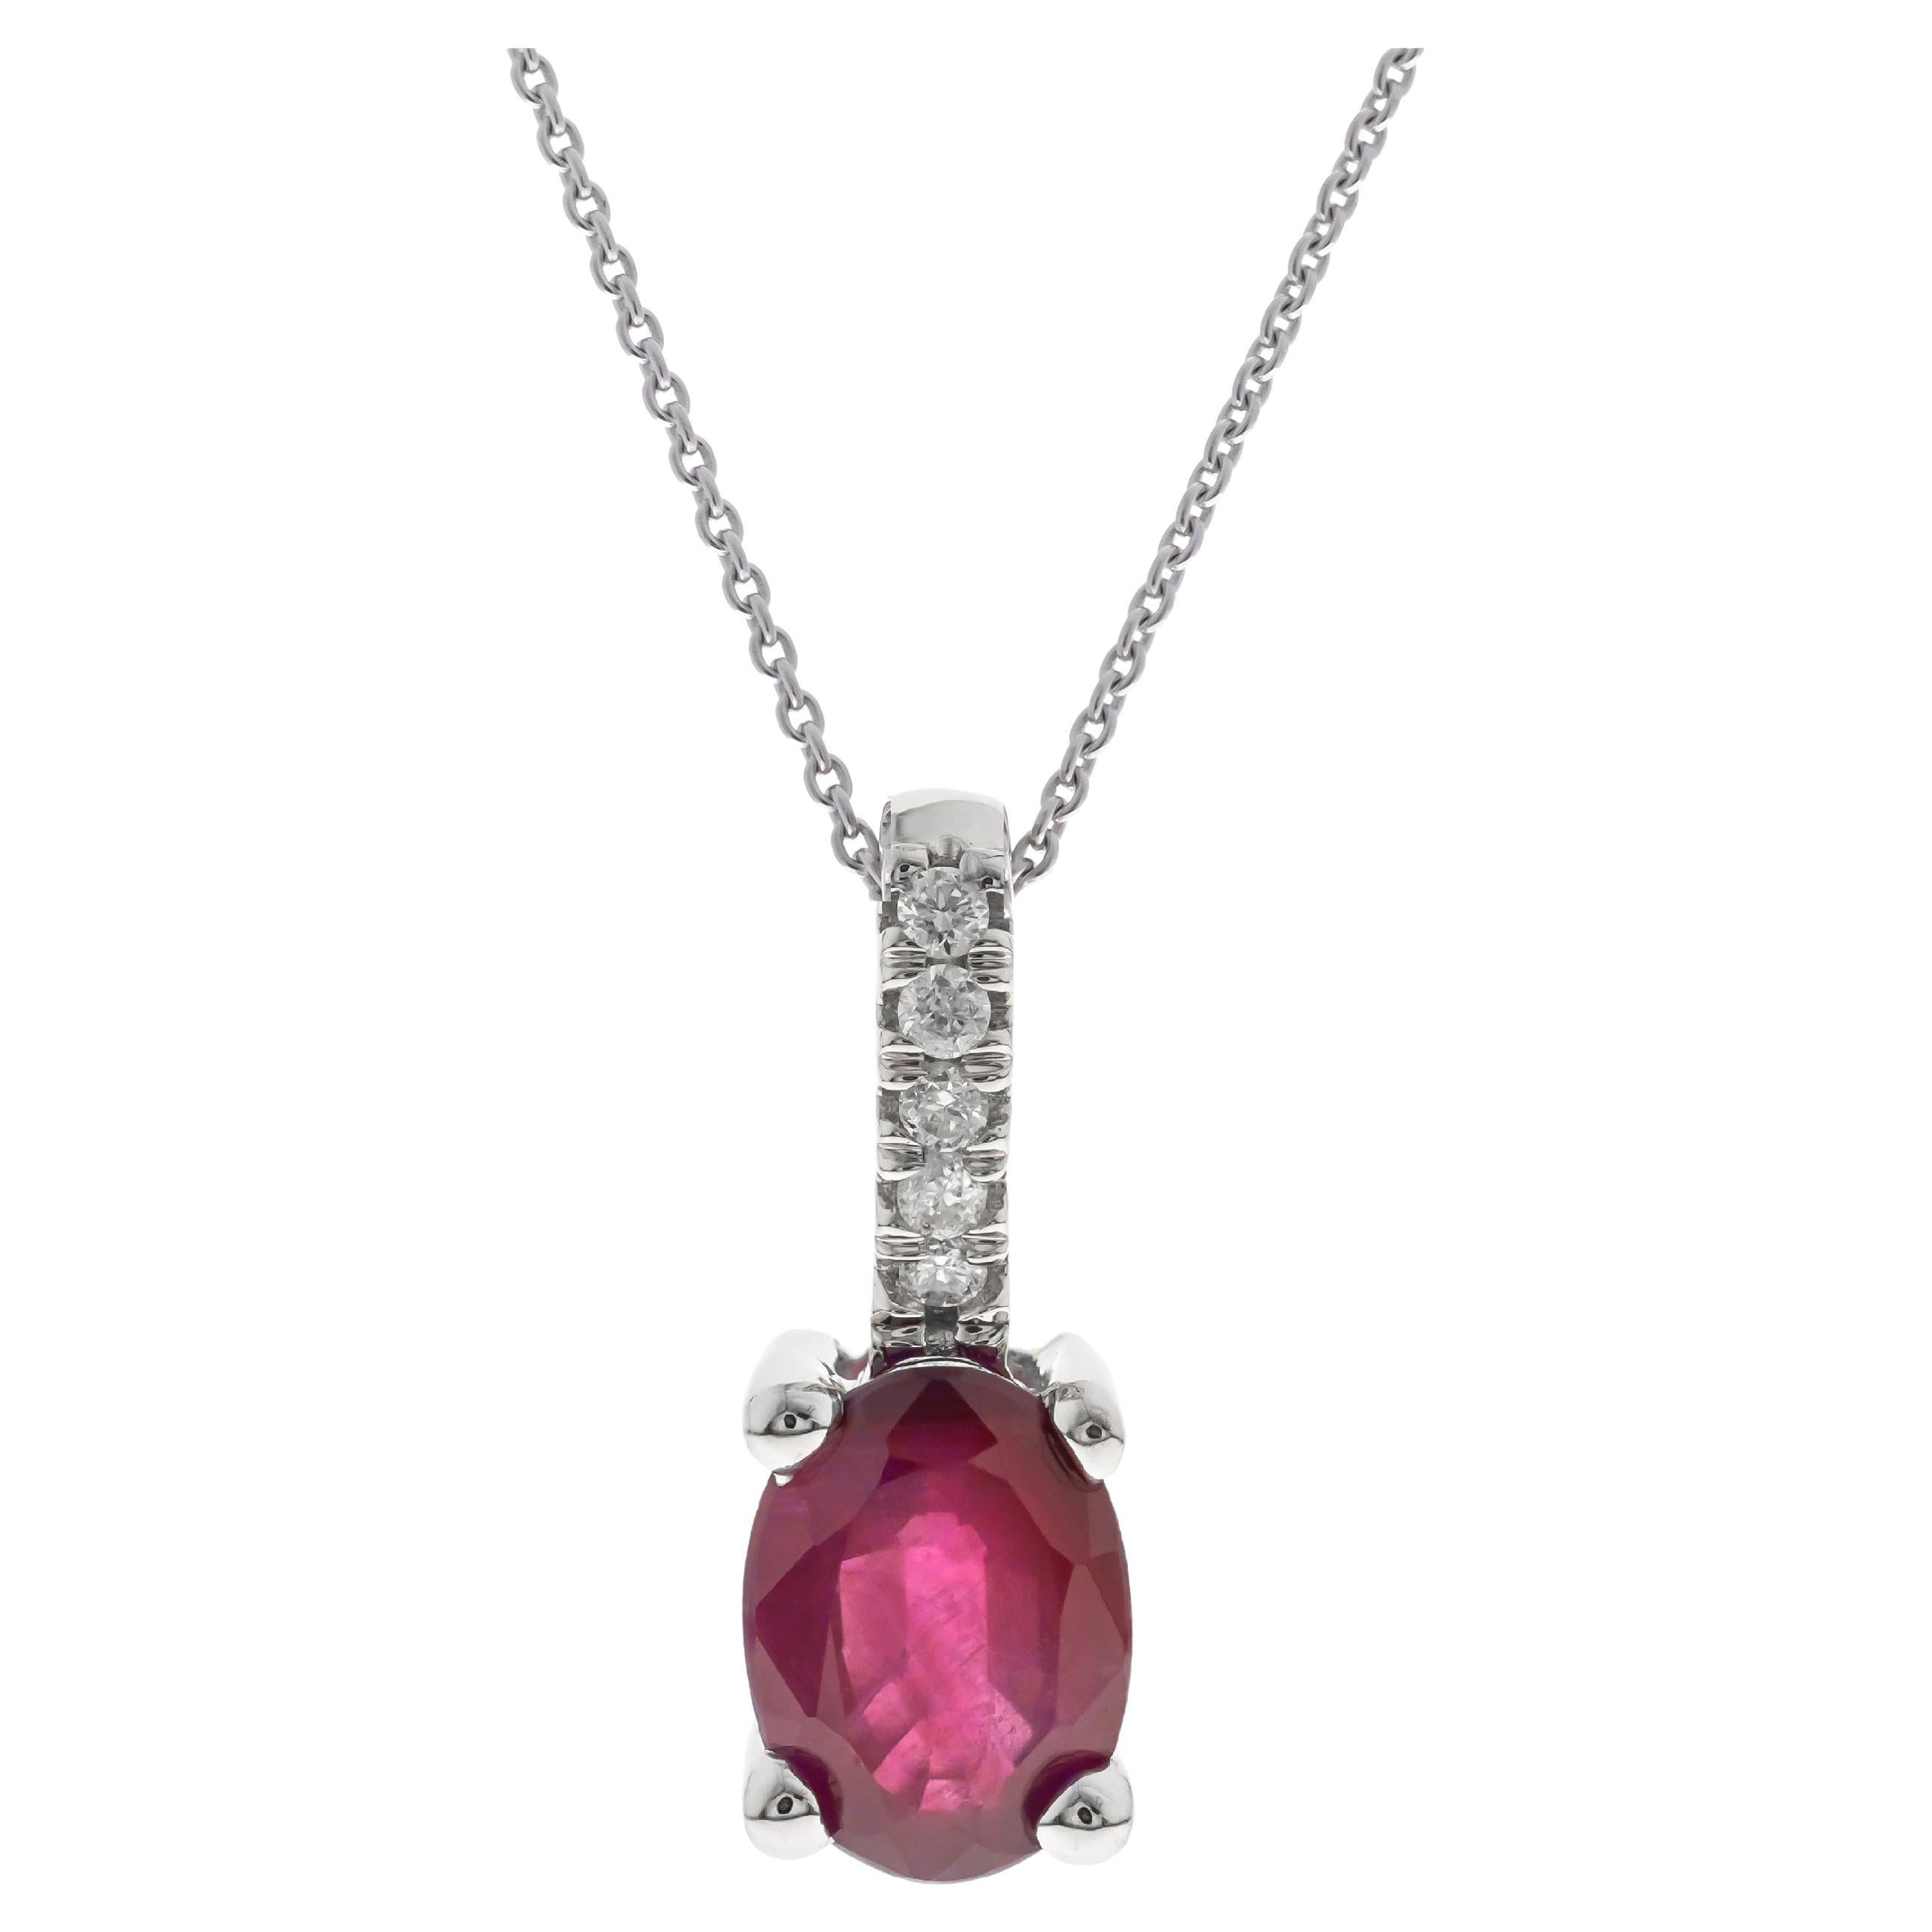 Gin & Grace 10K White Gold Mozambique Ruby Pendant with Diamonds for women